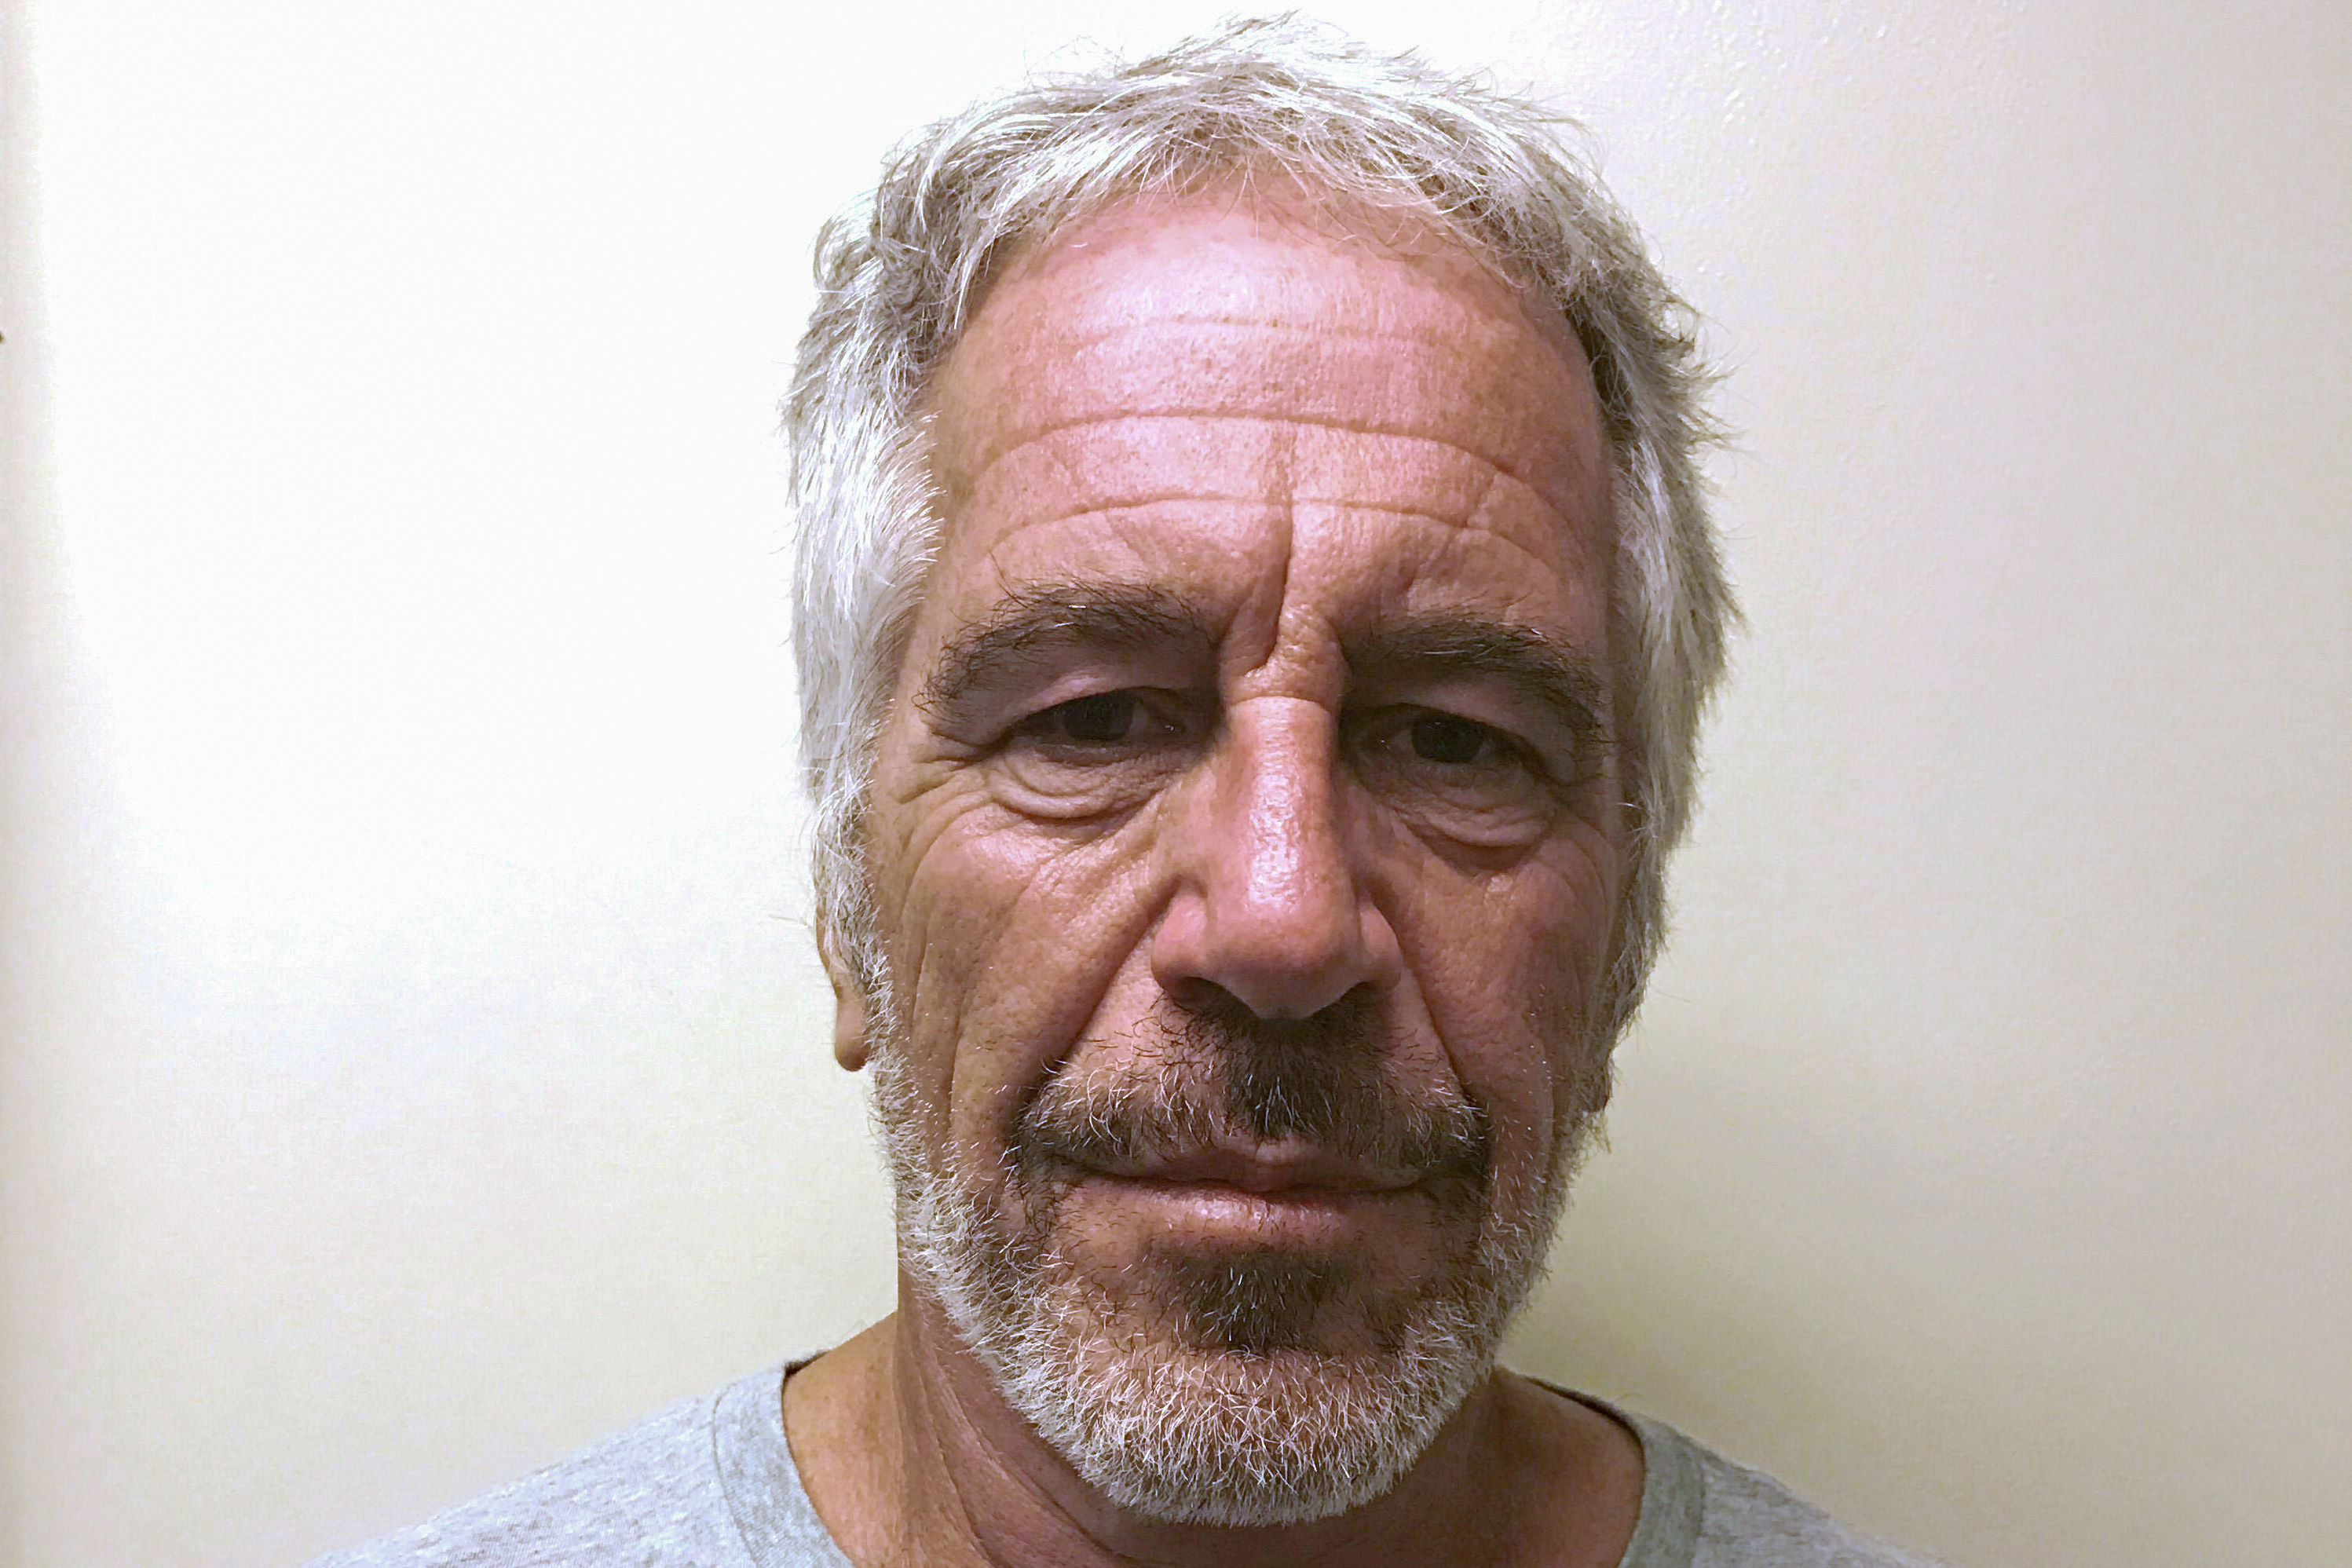 U.S. financier Jeffrey Epstein appears in a photograph taken for the New York State Division of Criminal Justice Services' sex offender registry March 28, 2017 and obtained by Reuters July 10, 2019. (New York State Division of Criminal Justice Services/Handout via REUTERS)